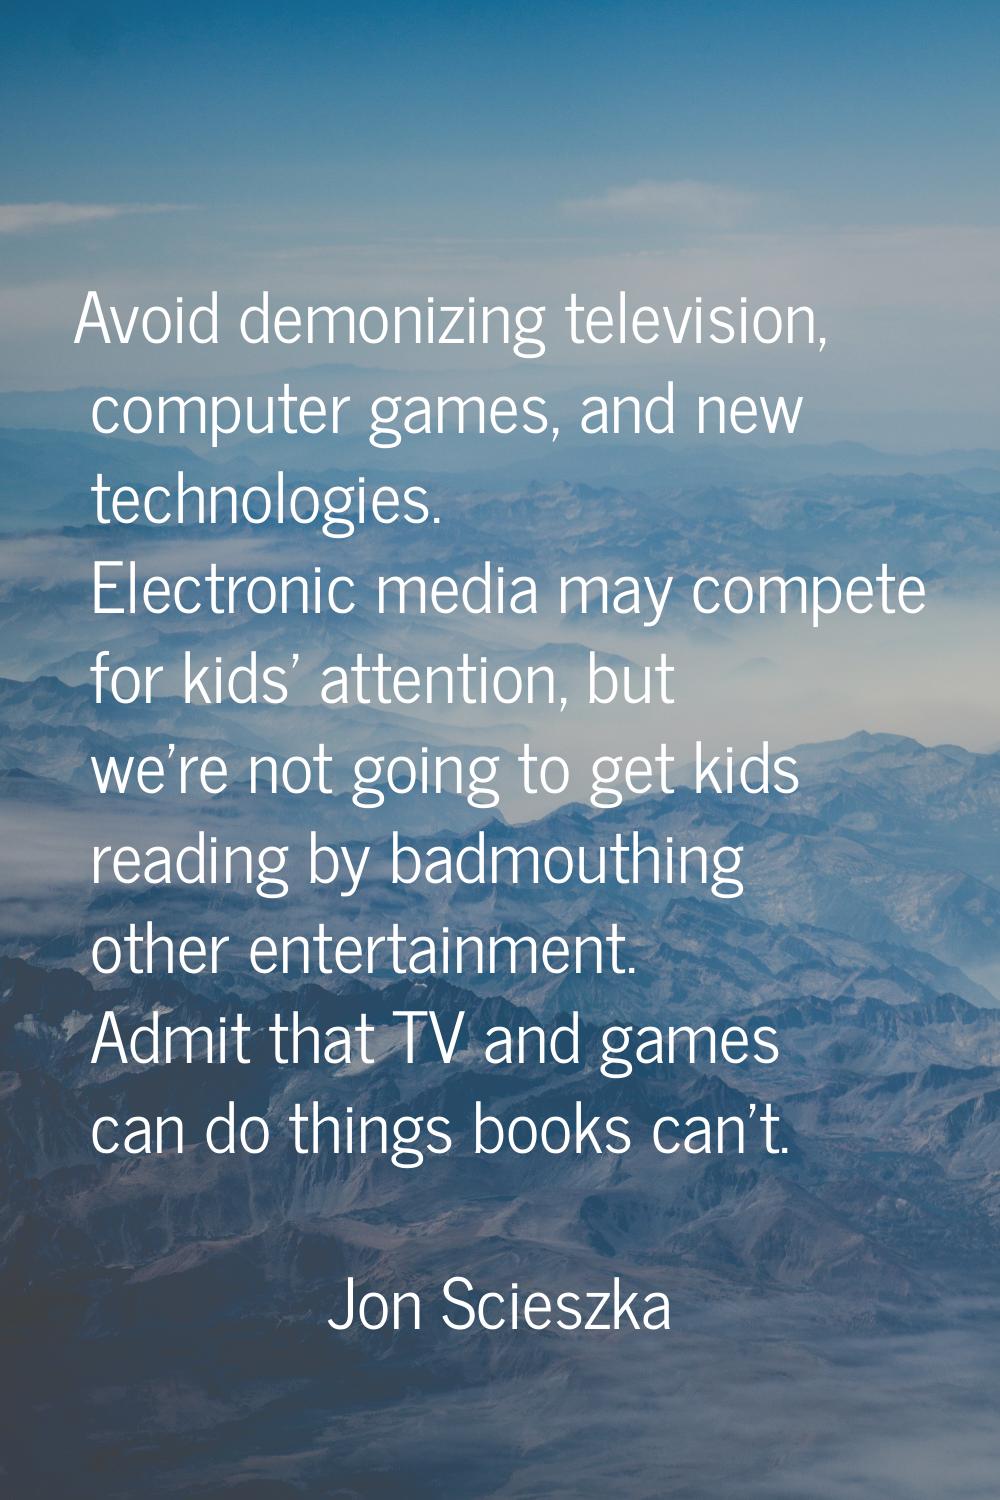 Avoid demonizing television, computer games, and new technologies. Electronic media may compete for